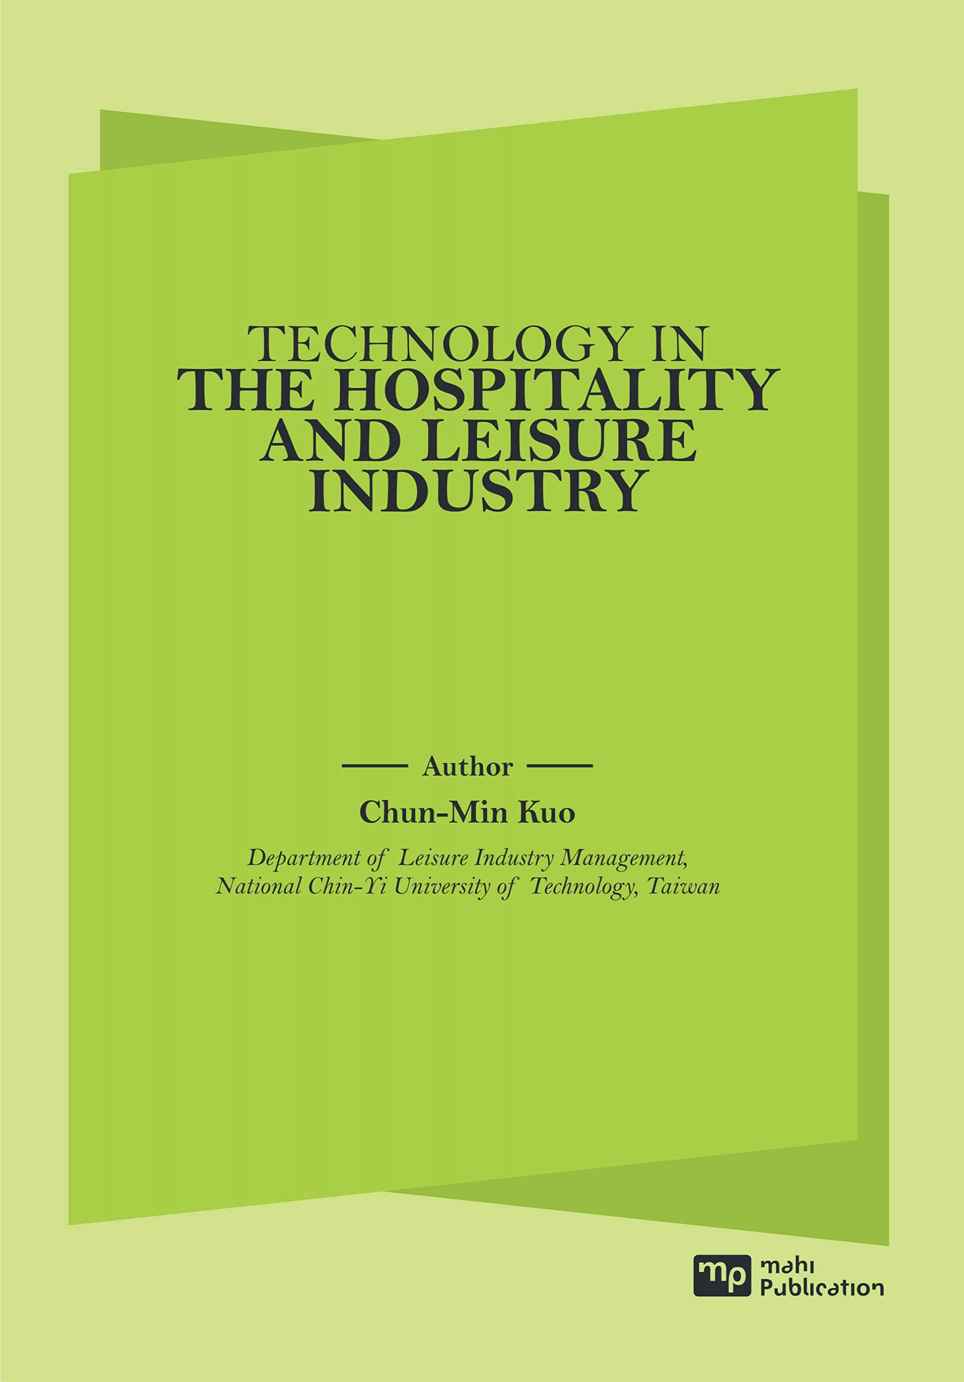 Technology in the Hospitality and Leisure Industry